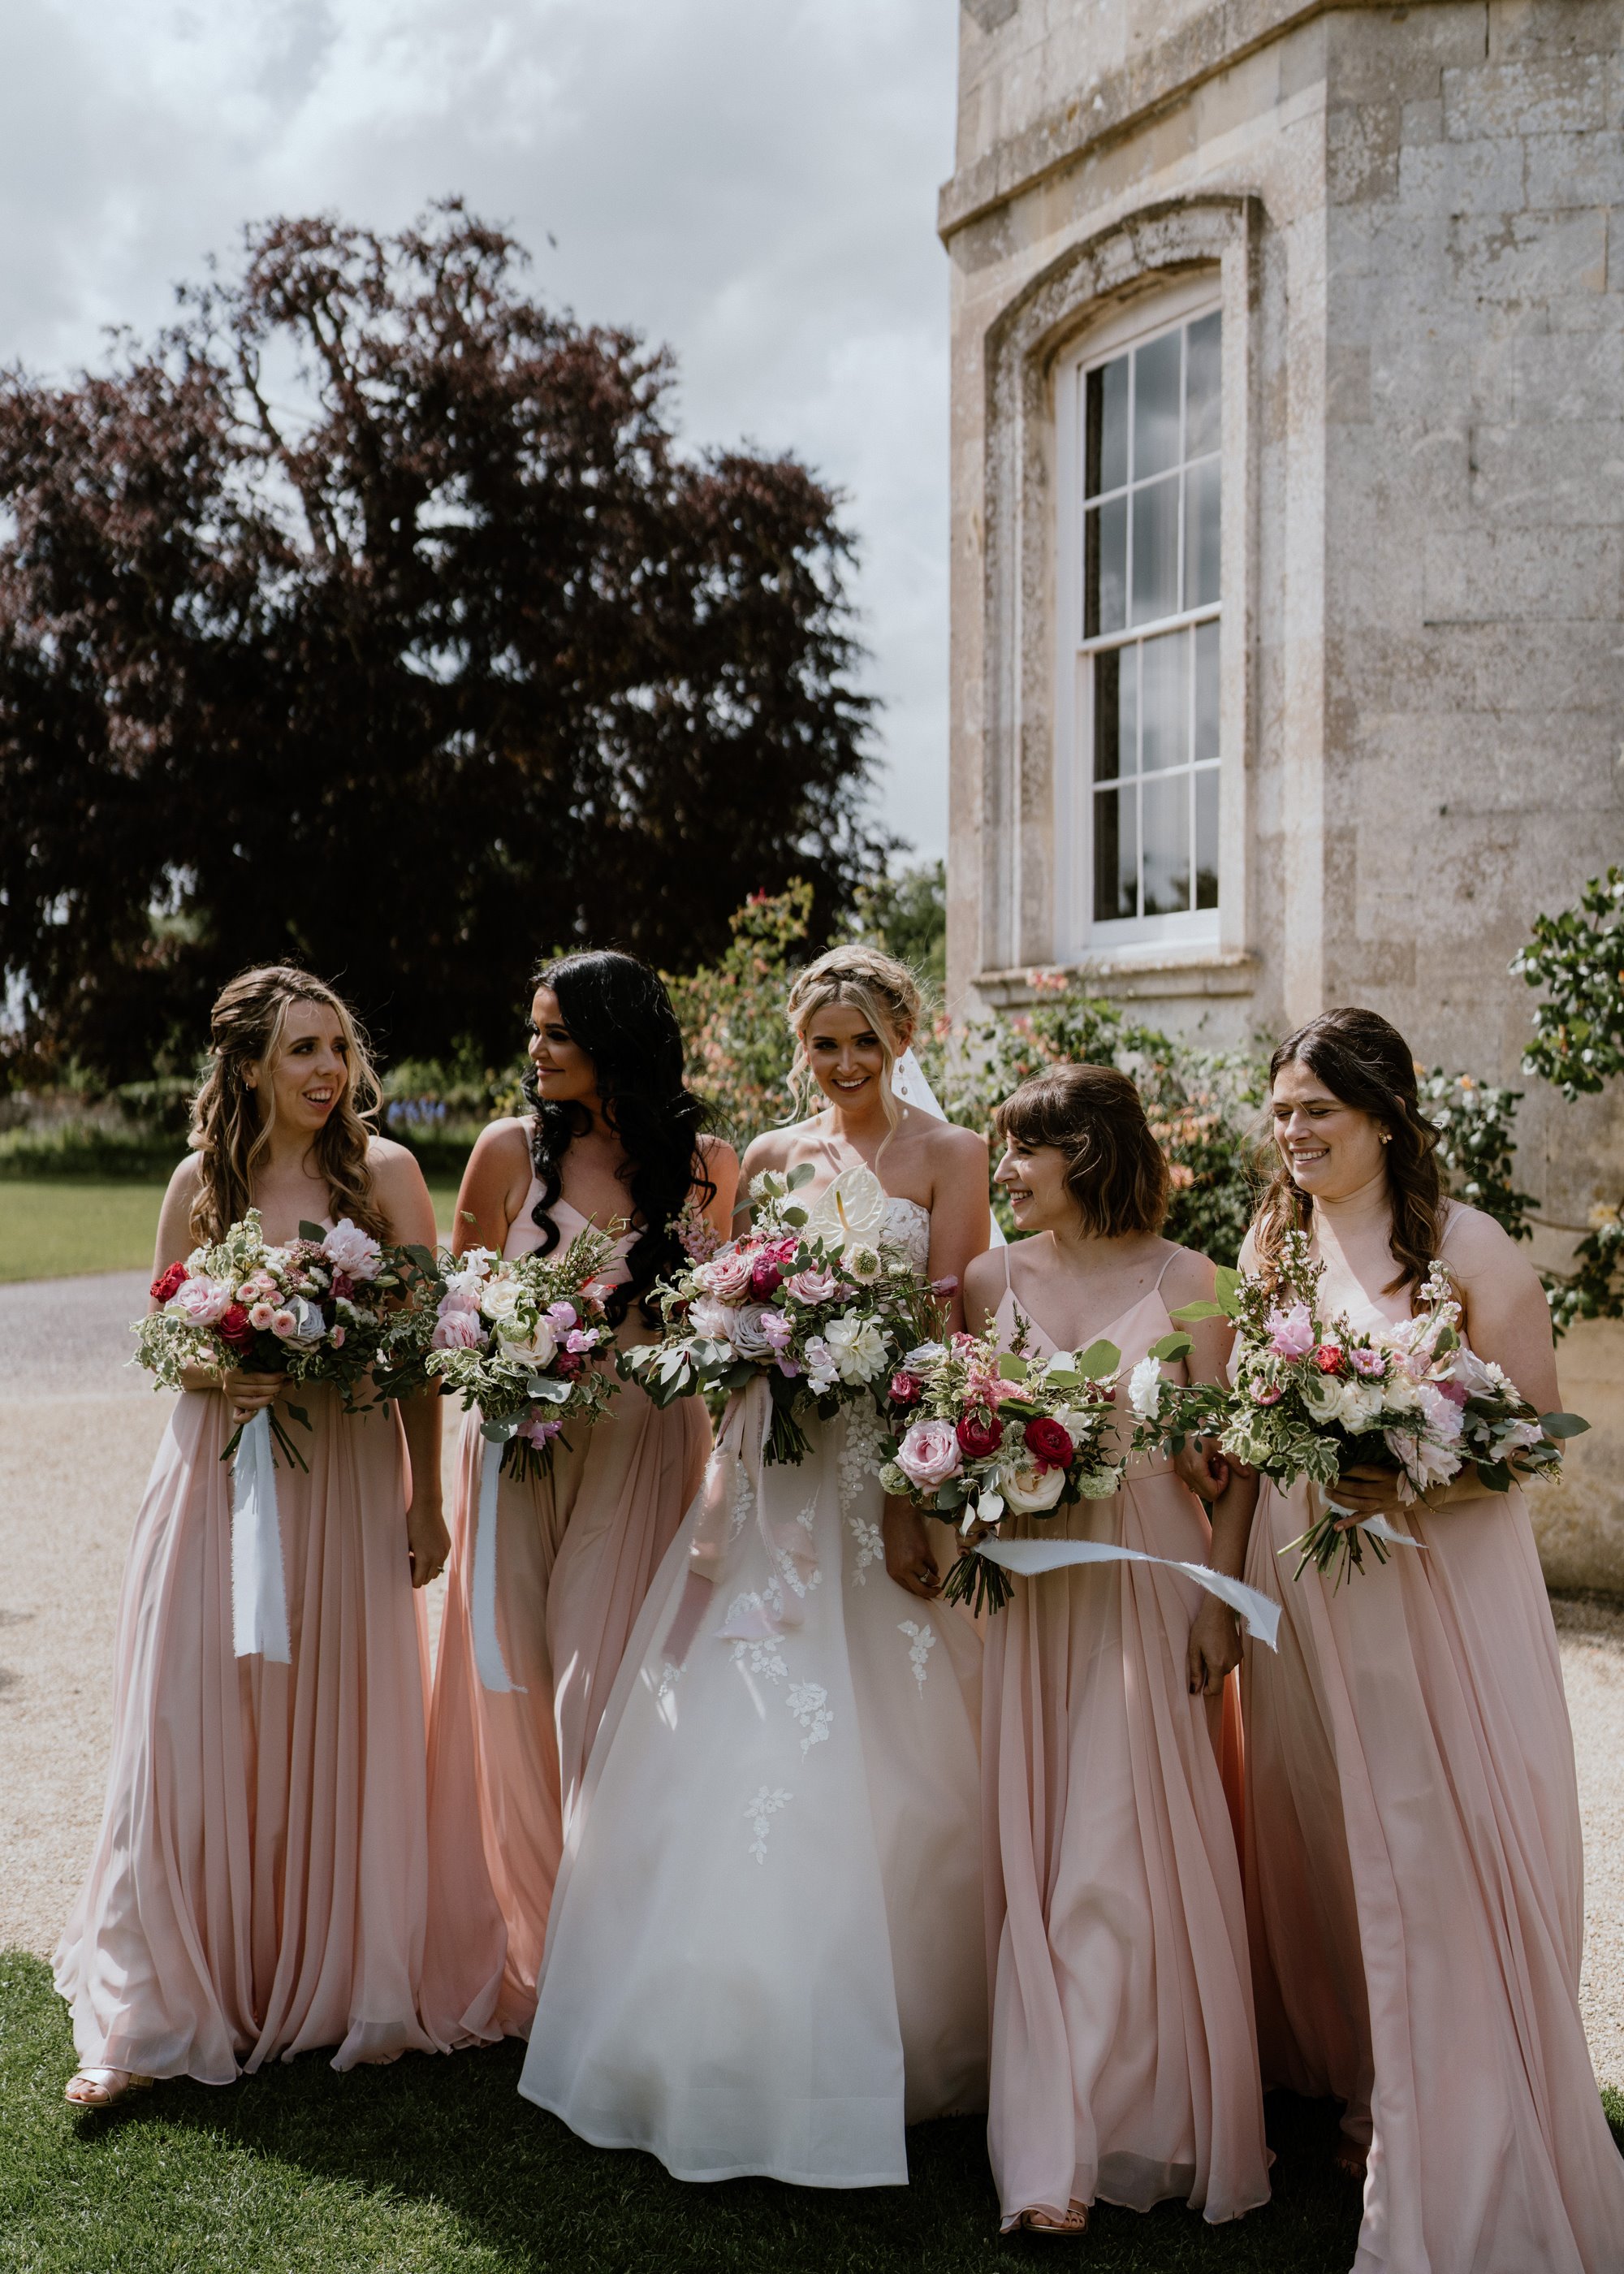 Bridesmaids and bride in romantic pink dresses holding bouquets with ribbons in front of beautiful mansion house wedding venue